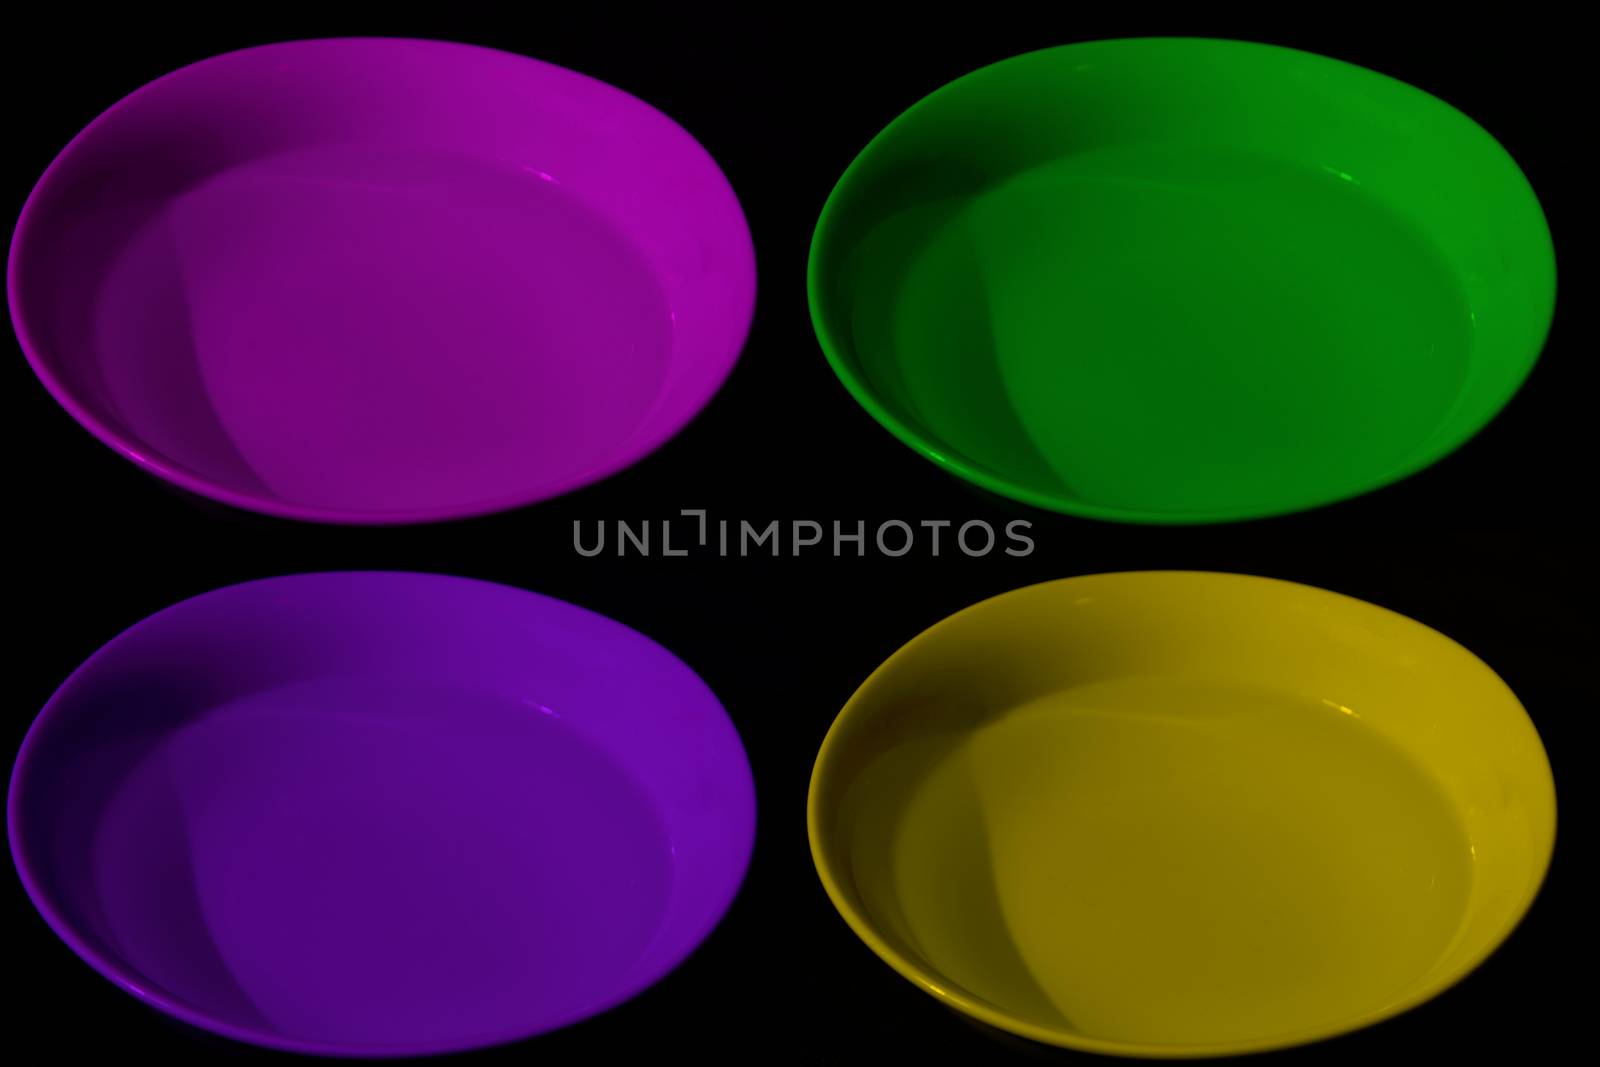 Four bowls with different colored water by raul_ruiz